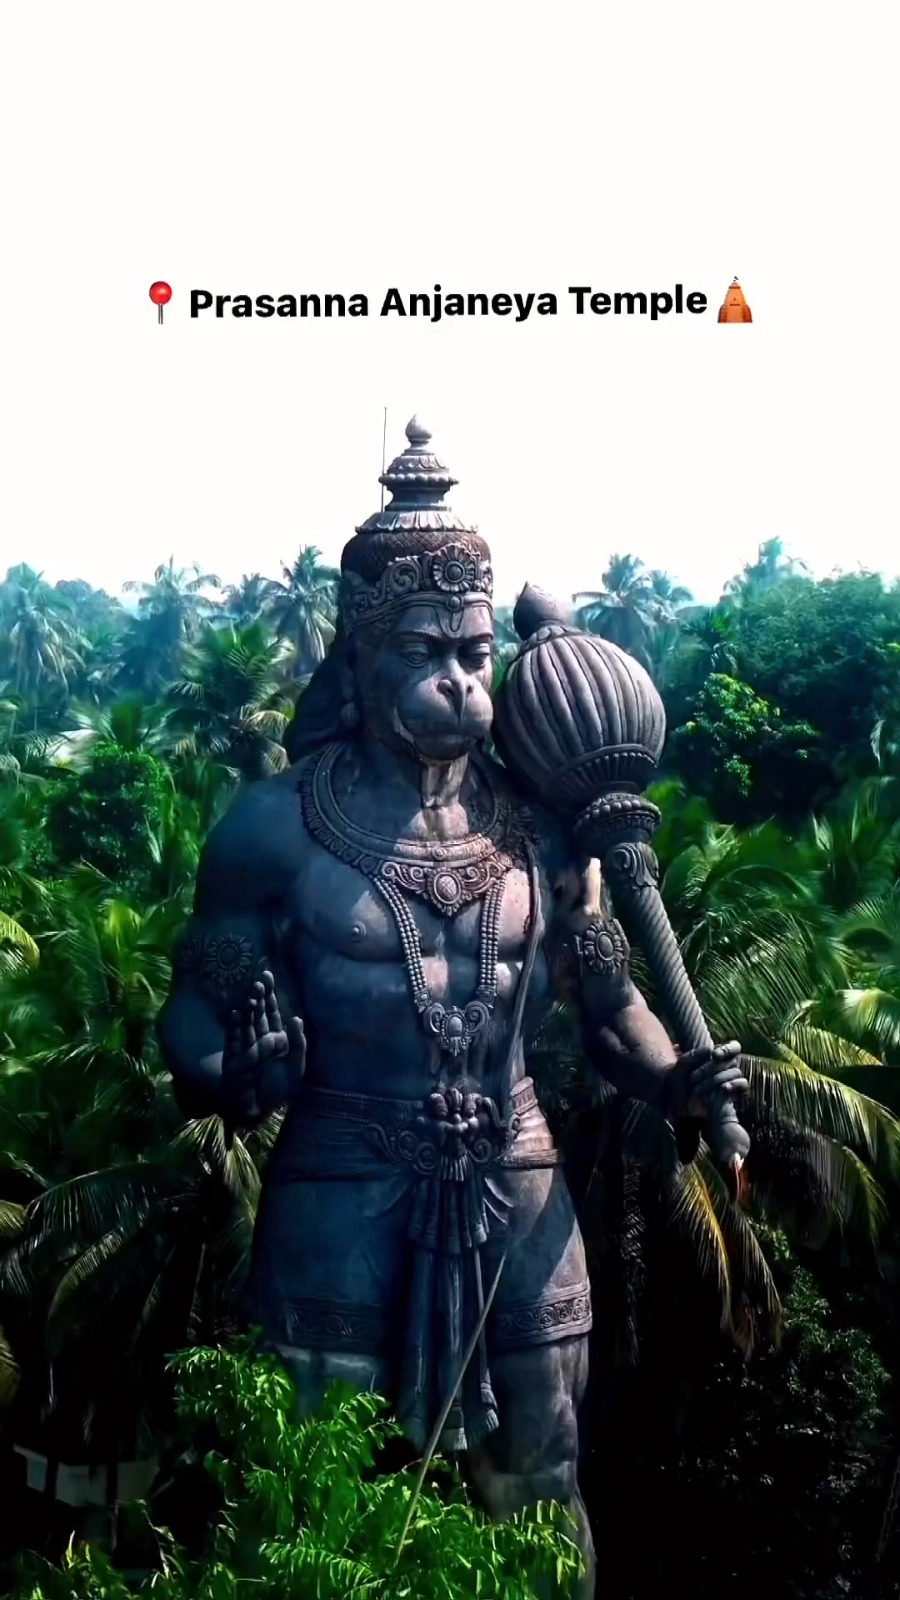 Second Tallest Statue of Lord Hanuman in India!